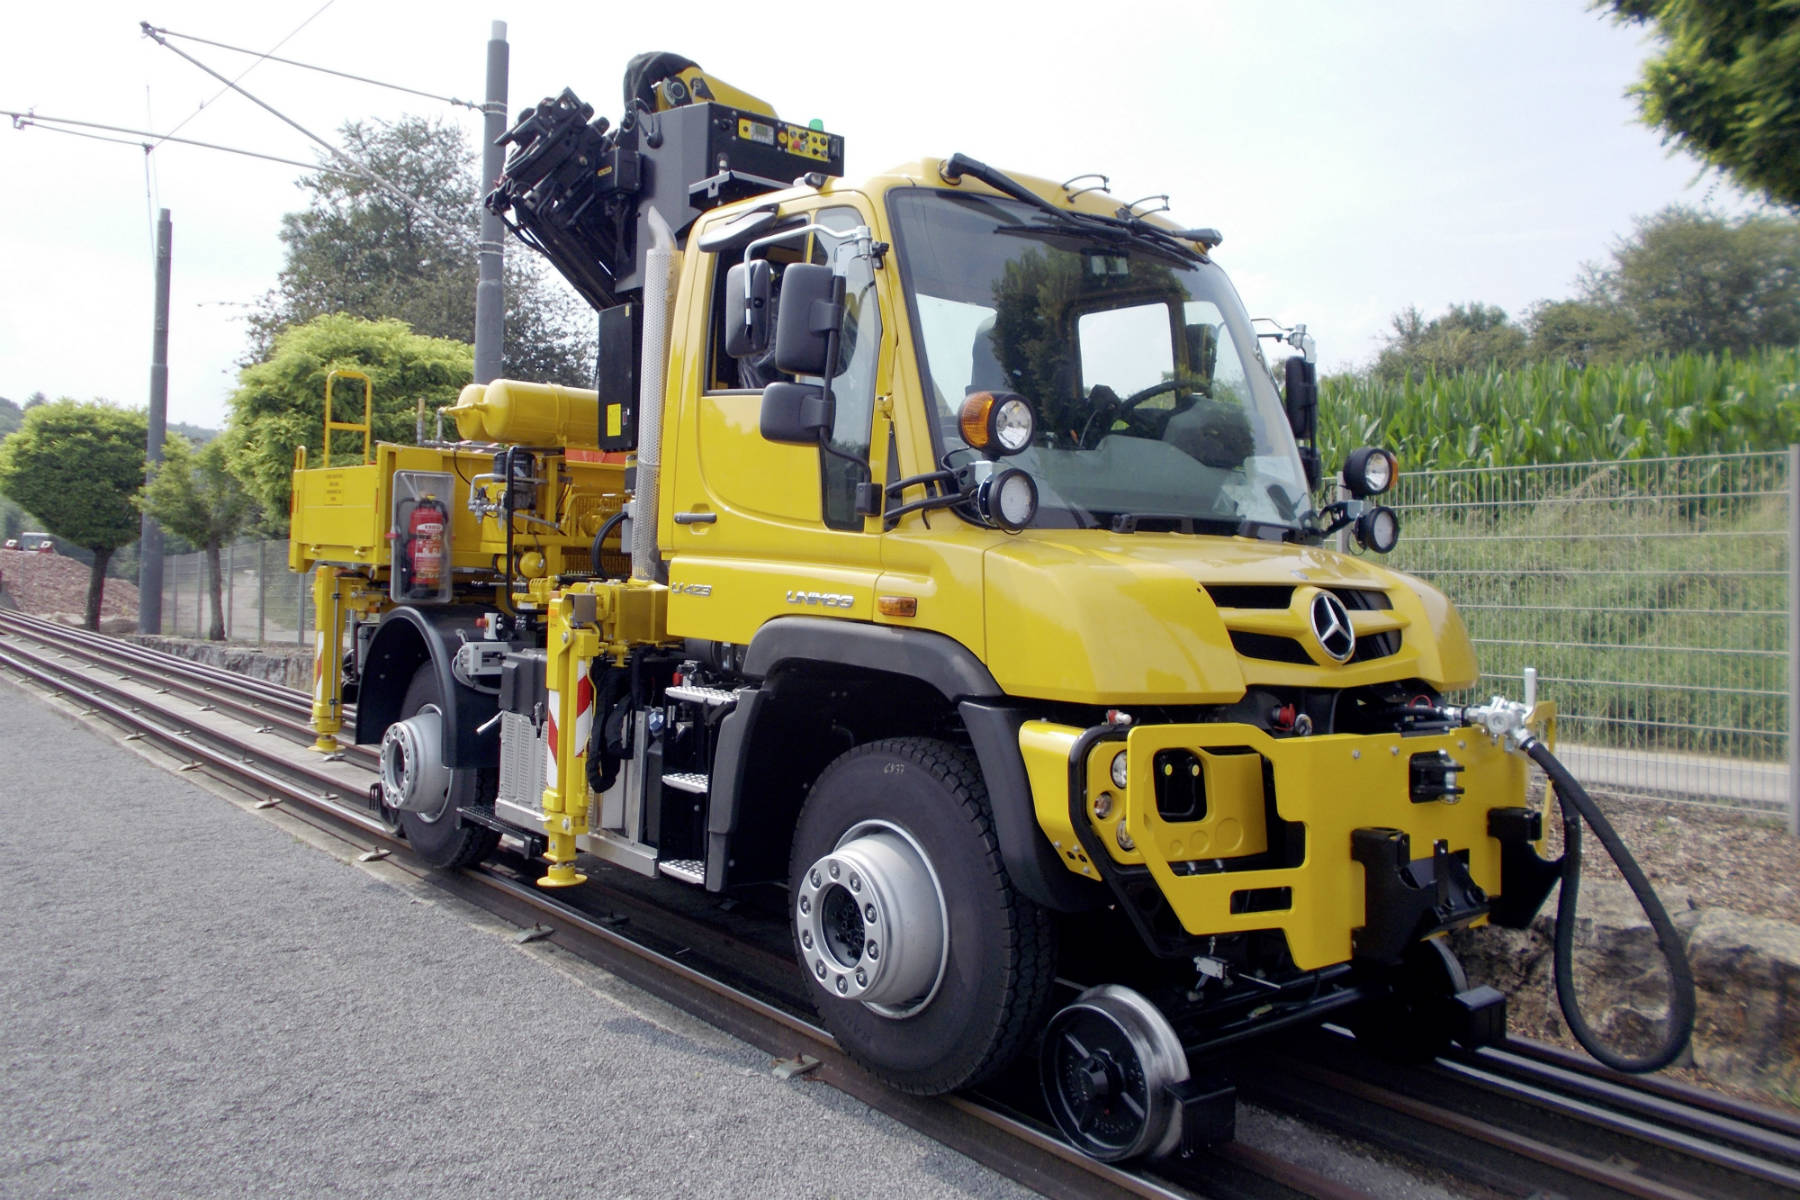 This Mercedes-Benz Unimog handles like it's on rails